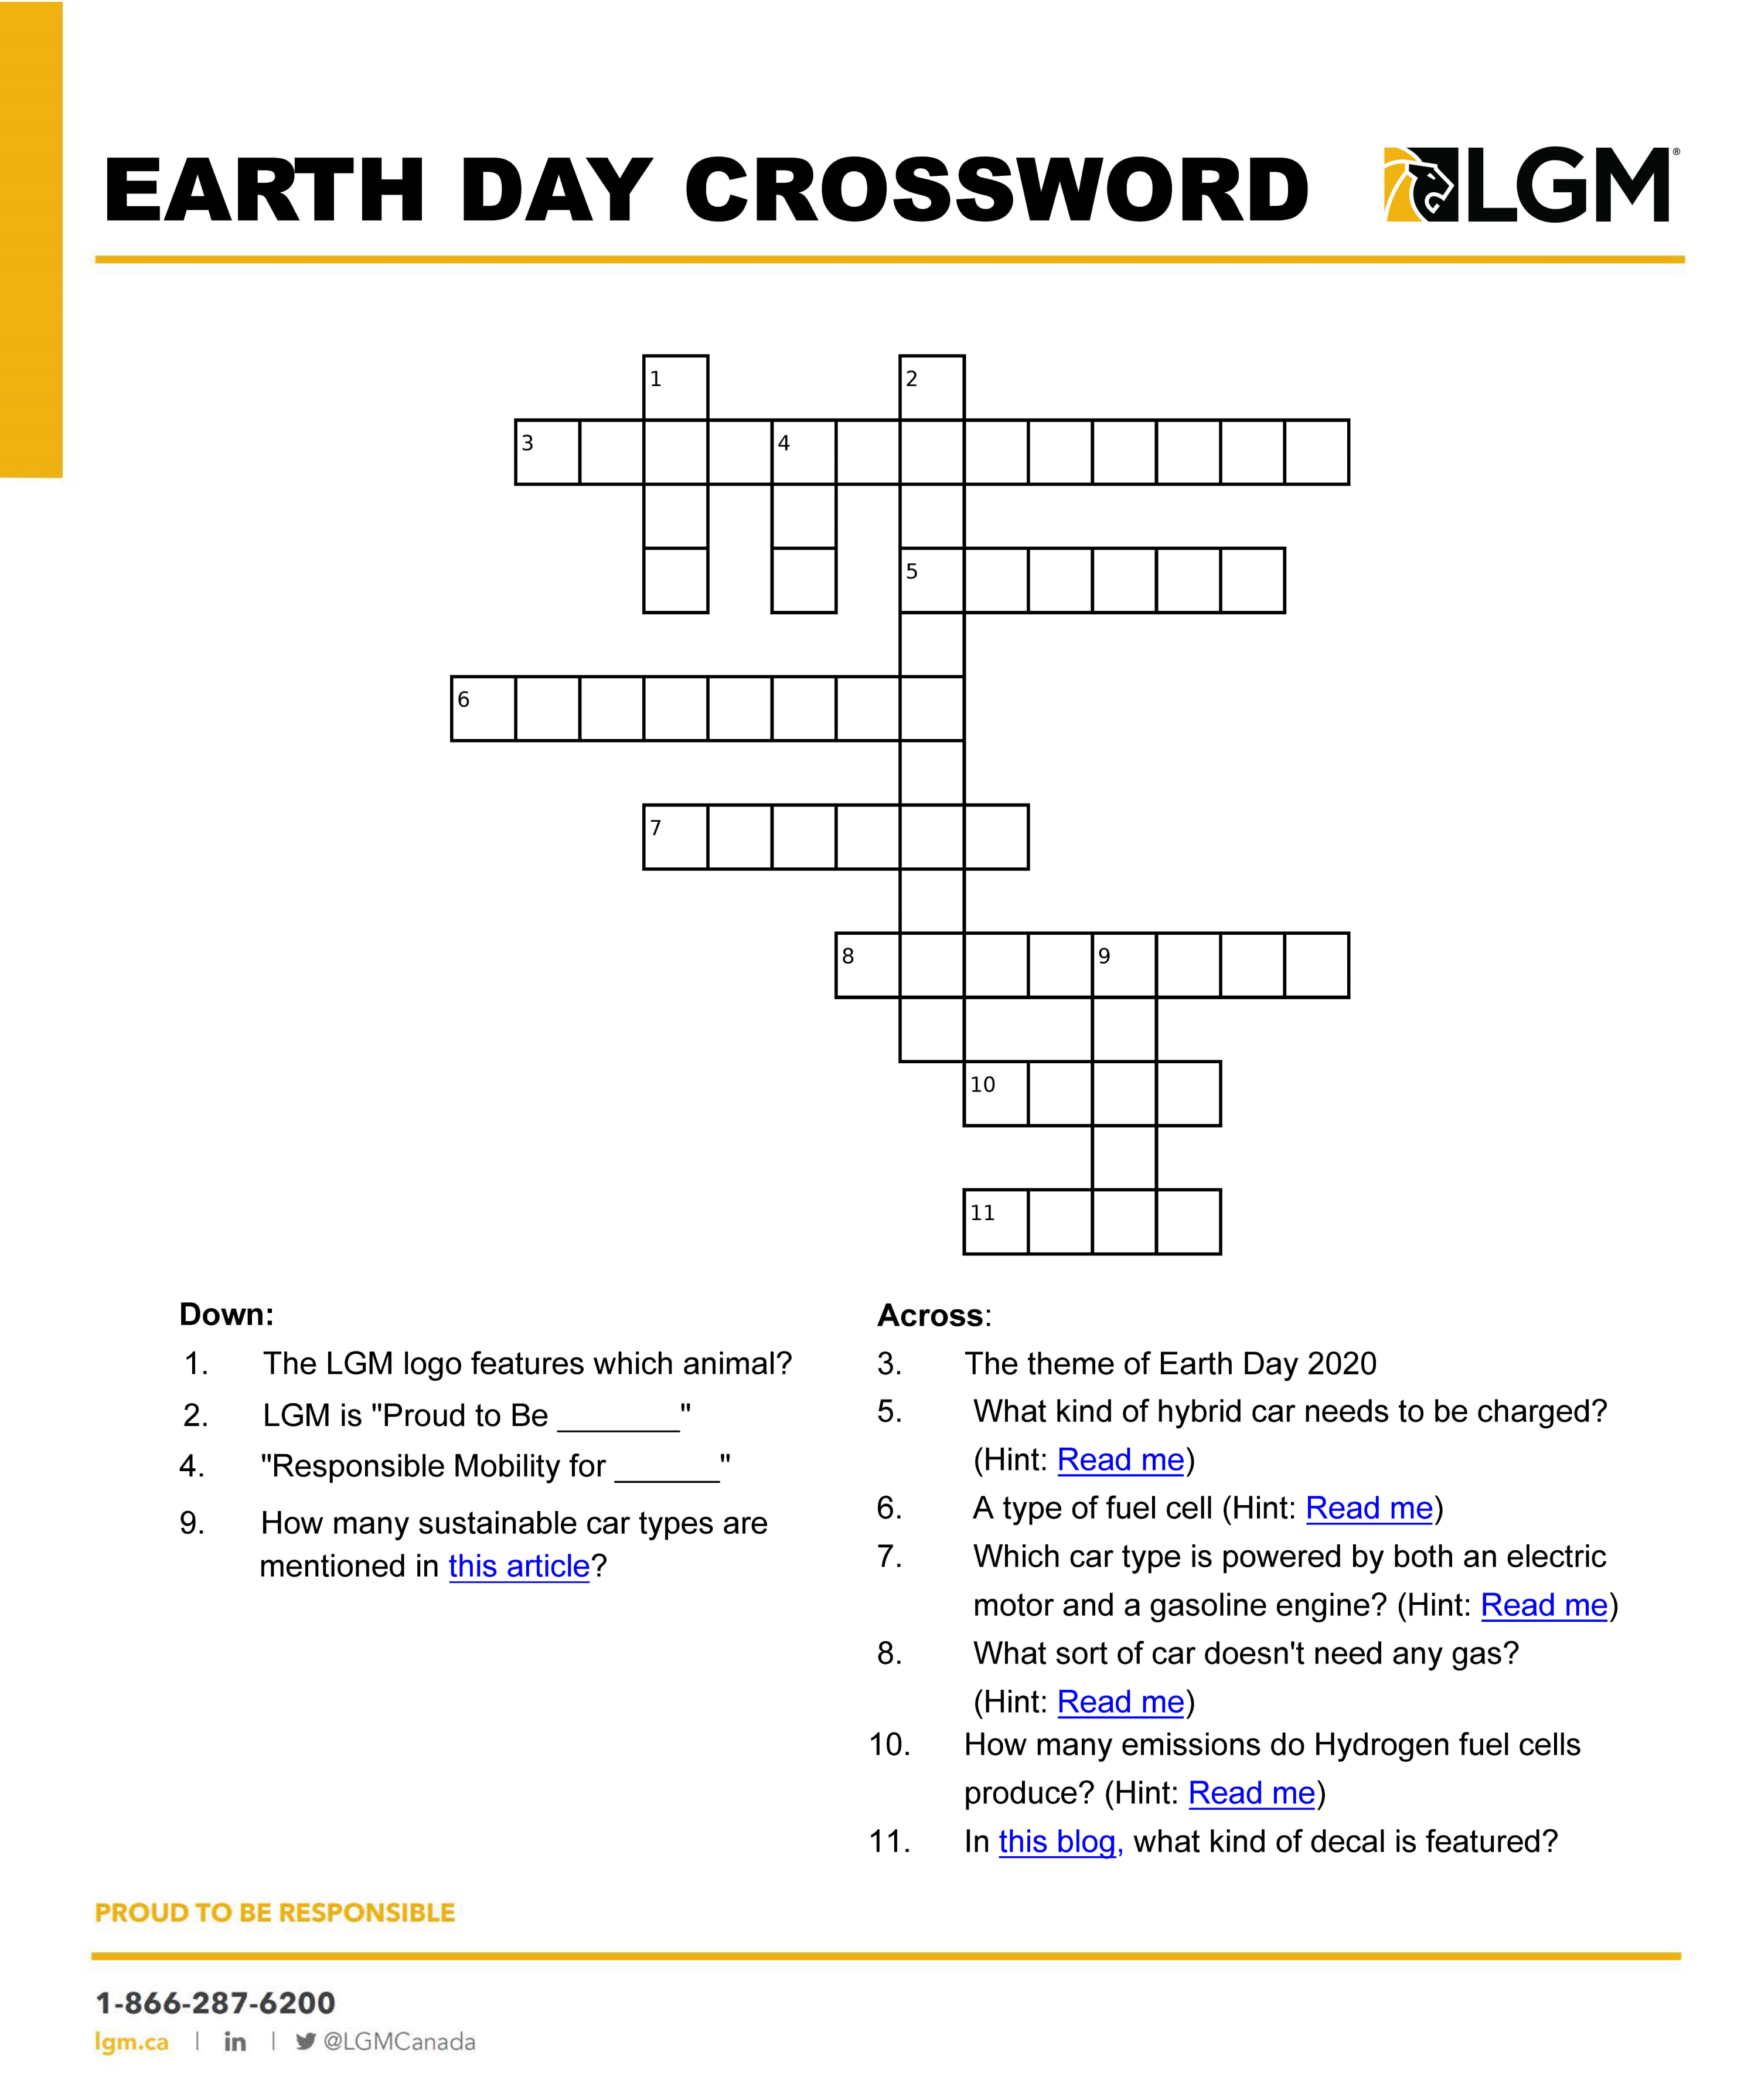 Earth Day Crossword LGM Financial Services Inc.